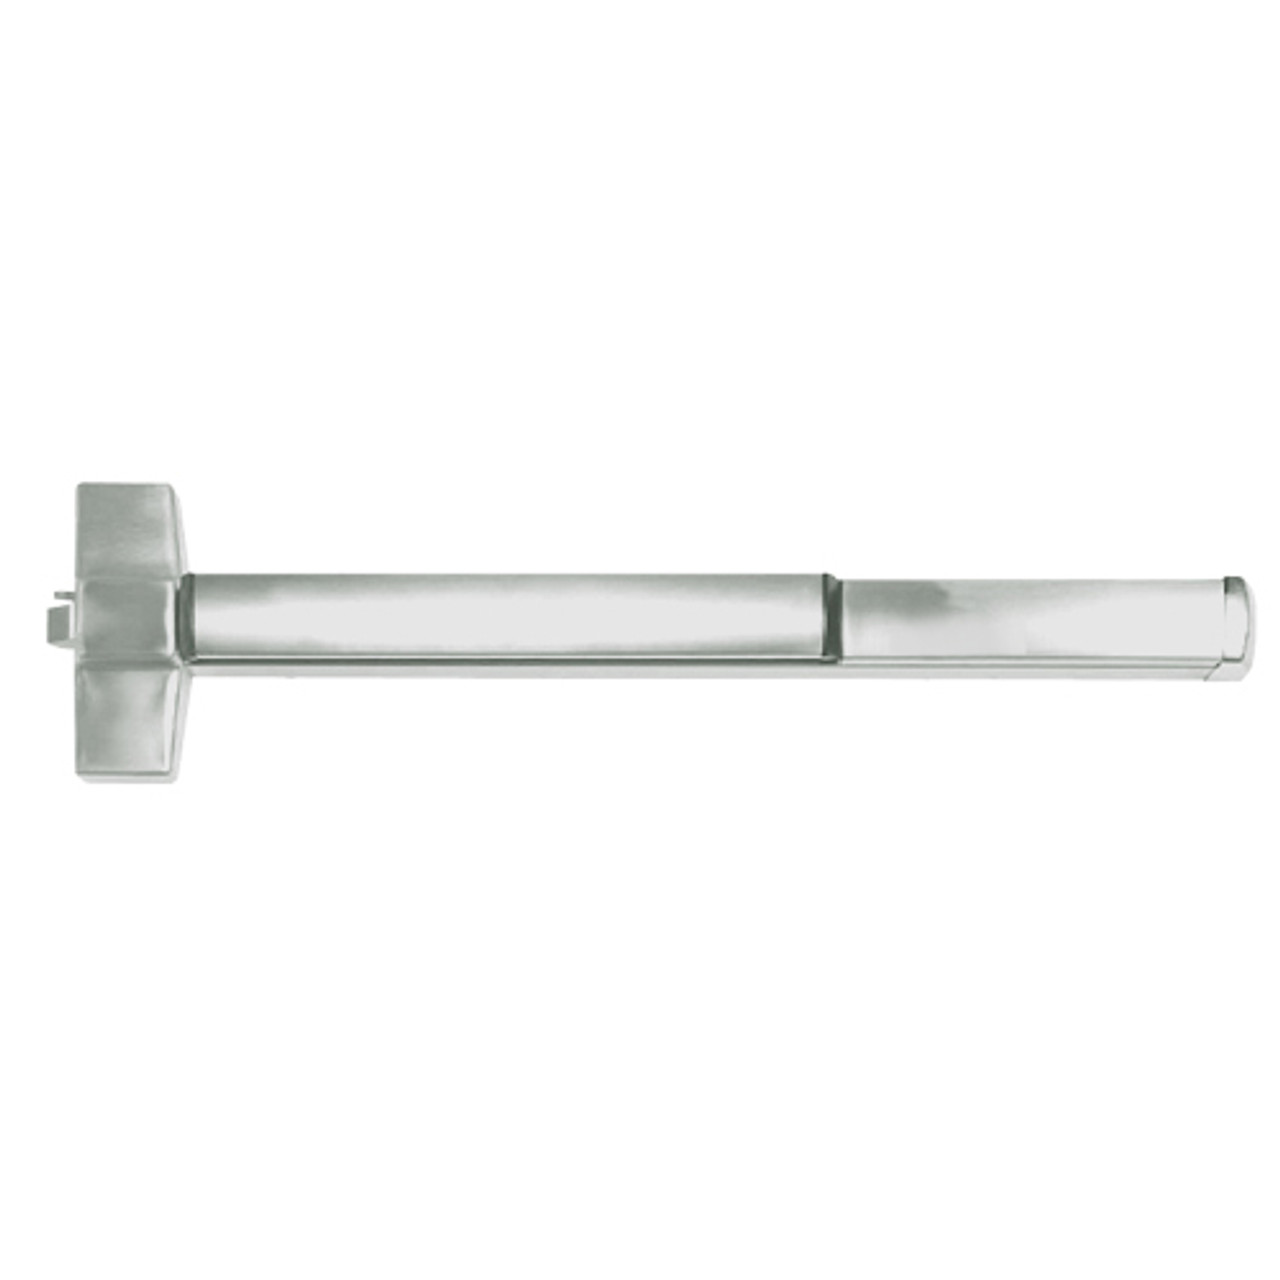 ED5200A-619-W048-MELR Corbin ED5200 Series Fire Rated Rim Exit Device with Motor Latch Retraction in Satin Nickel Finish